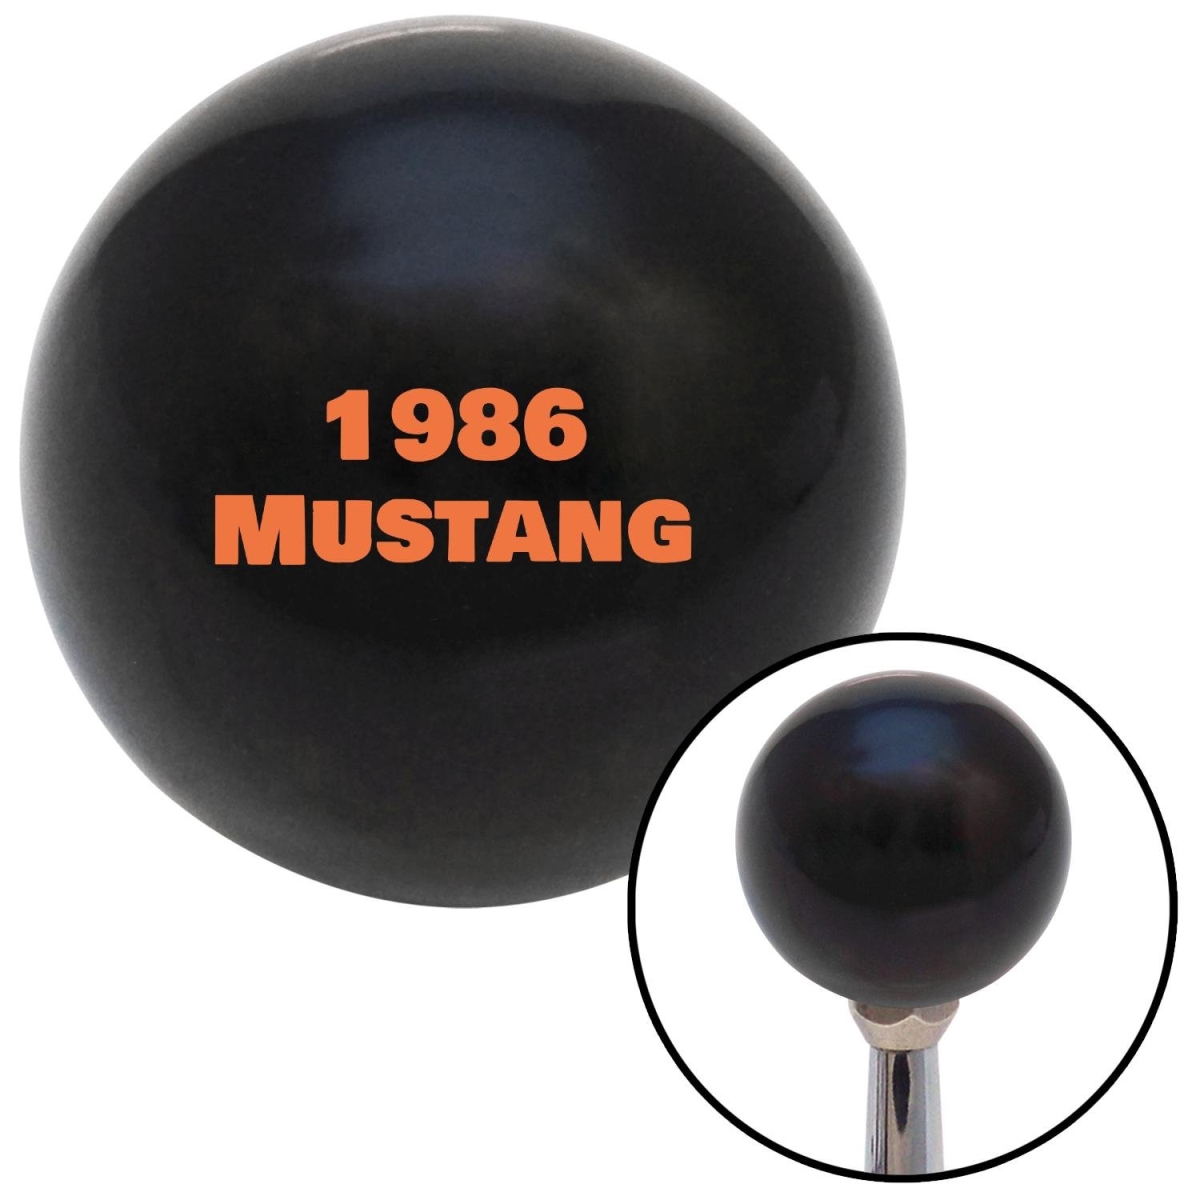 American Shifter 140156 Orange 1986 Mustang Black Shift Knob with M16 x 1.5 Insert Shifter Auto Manual Brody -  American Shifter Company